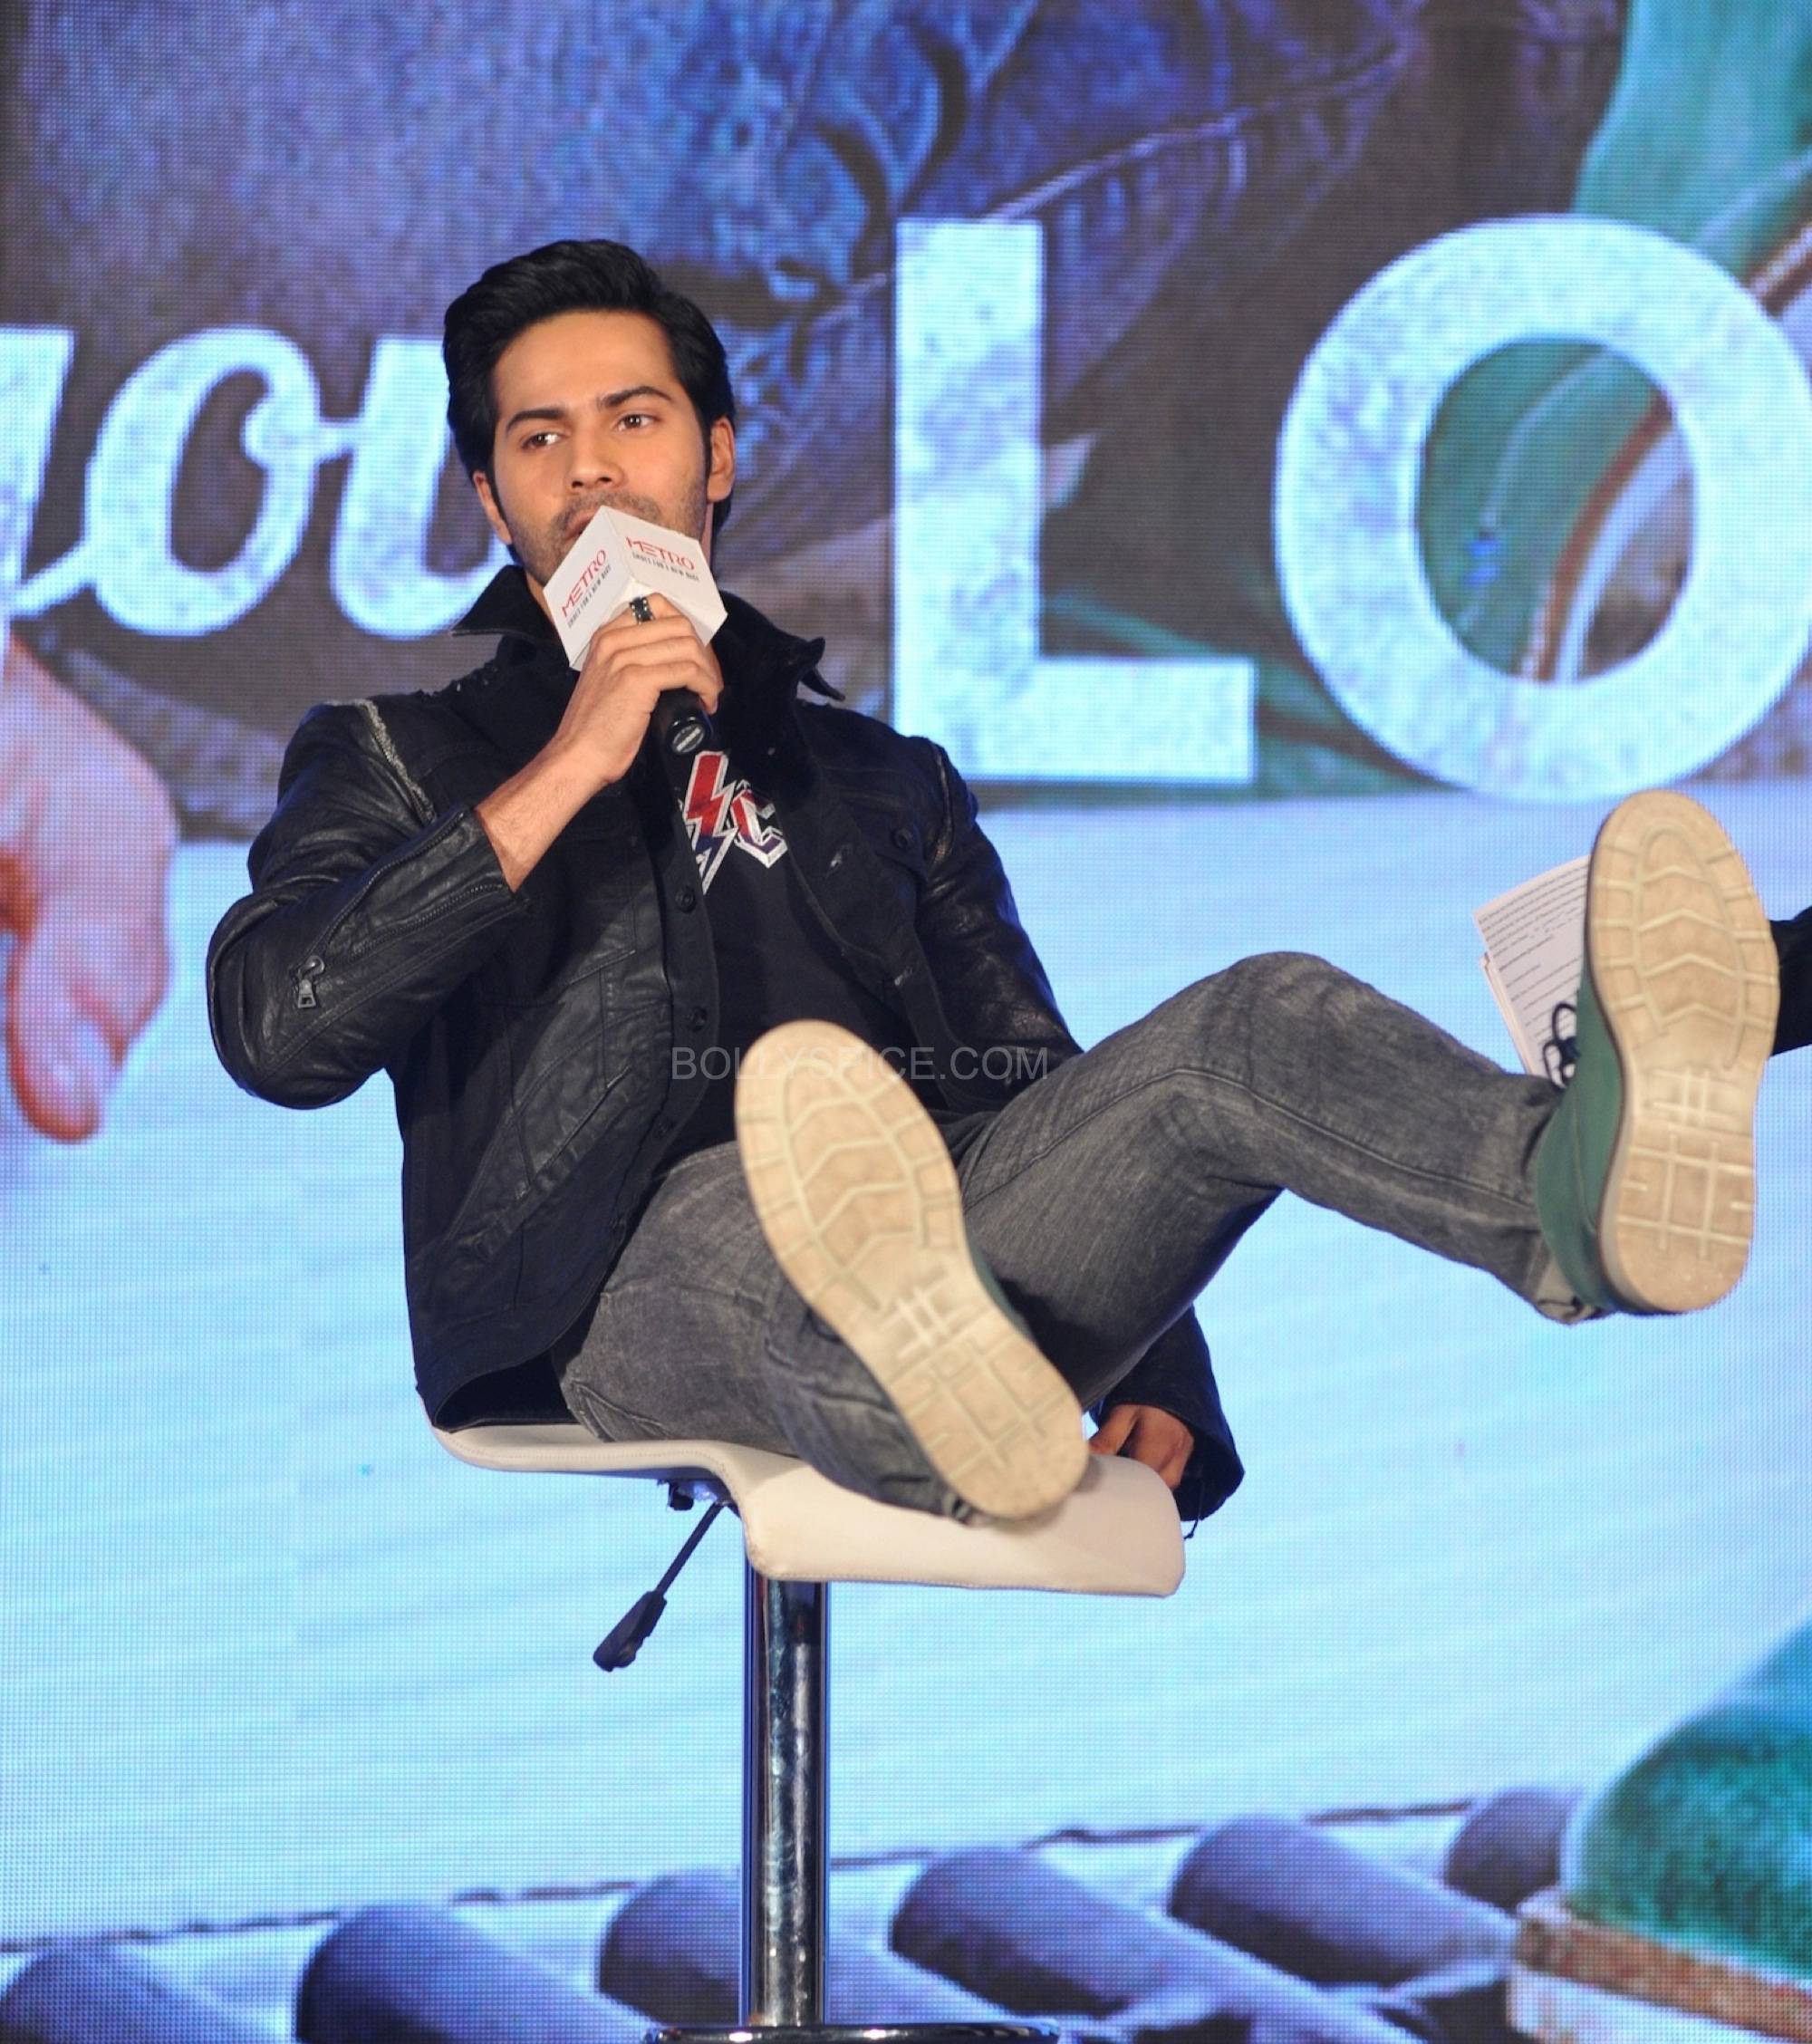 Varun Dhawan's Shoe Collection Might Make You Jealous - YouTube